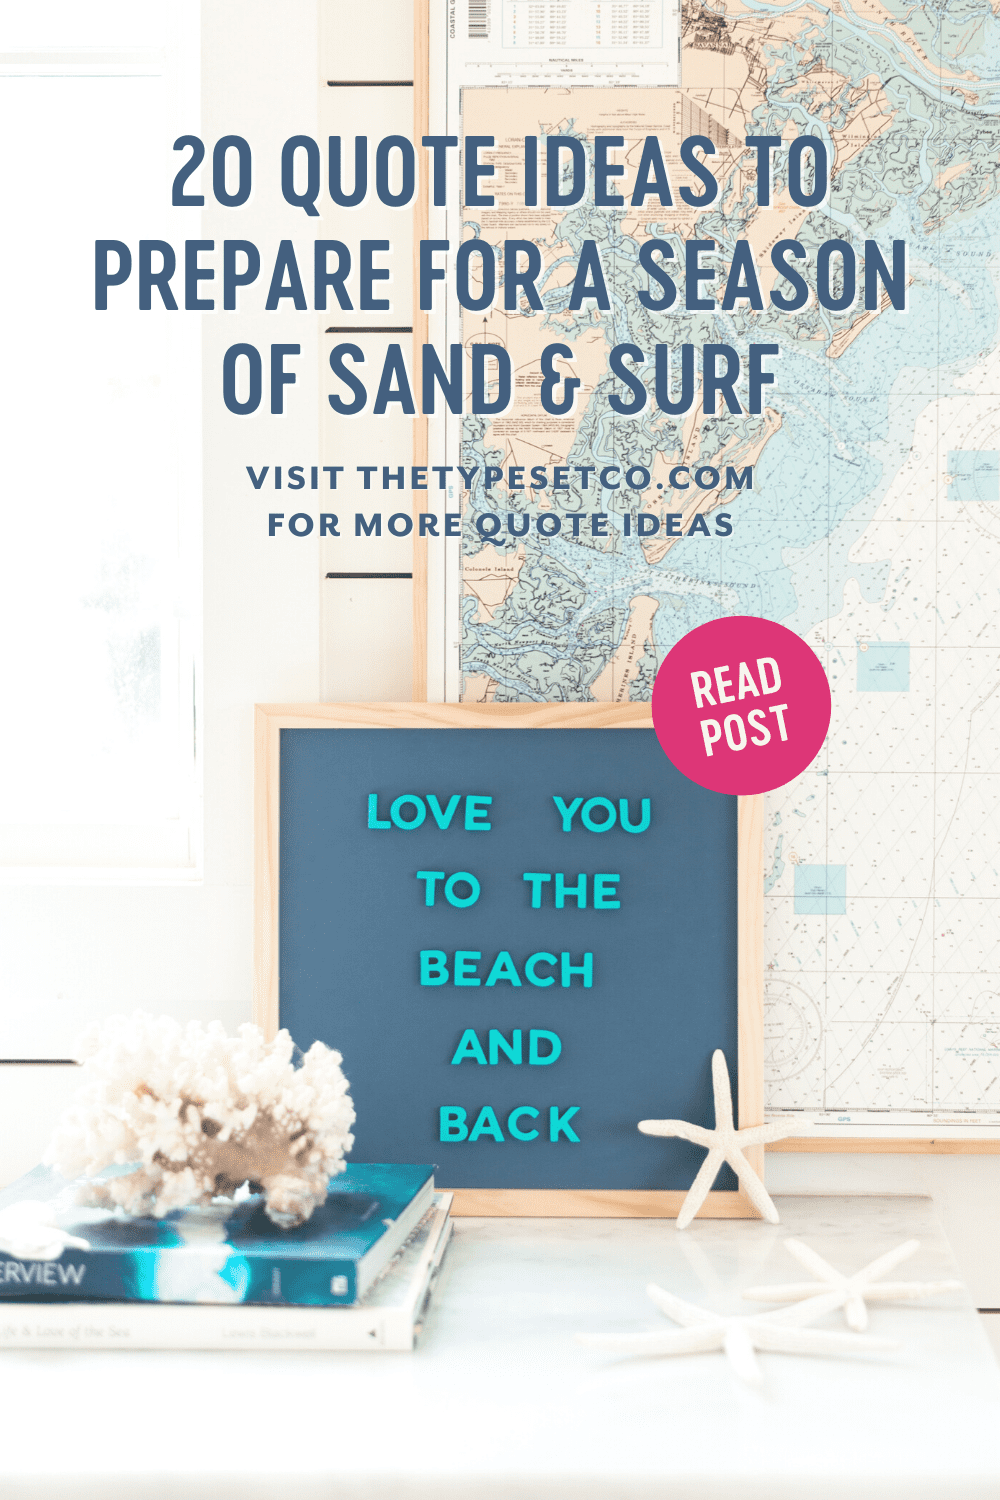 20 Letterboard Quotes to Prepare for a Season of Sand & Surf